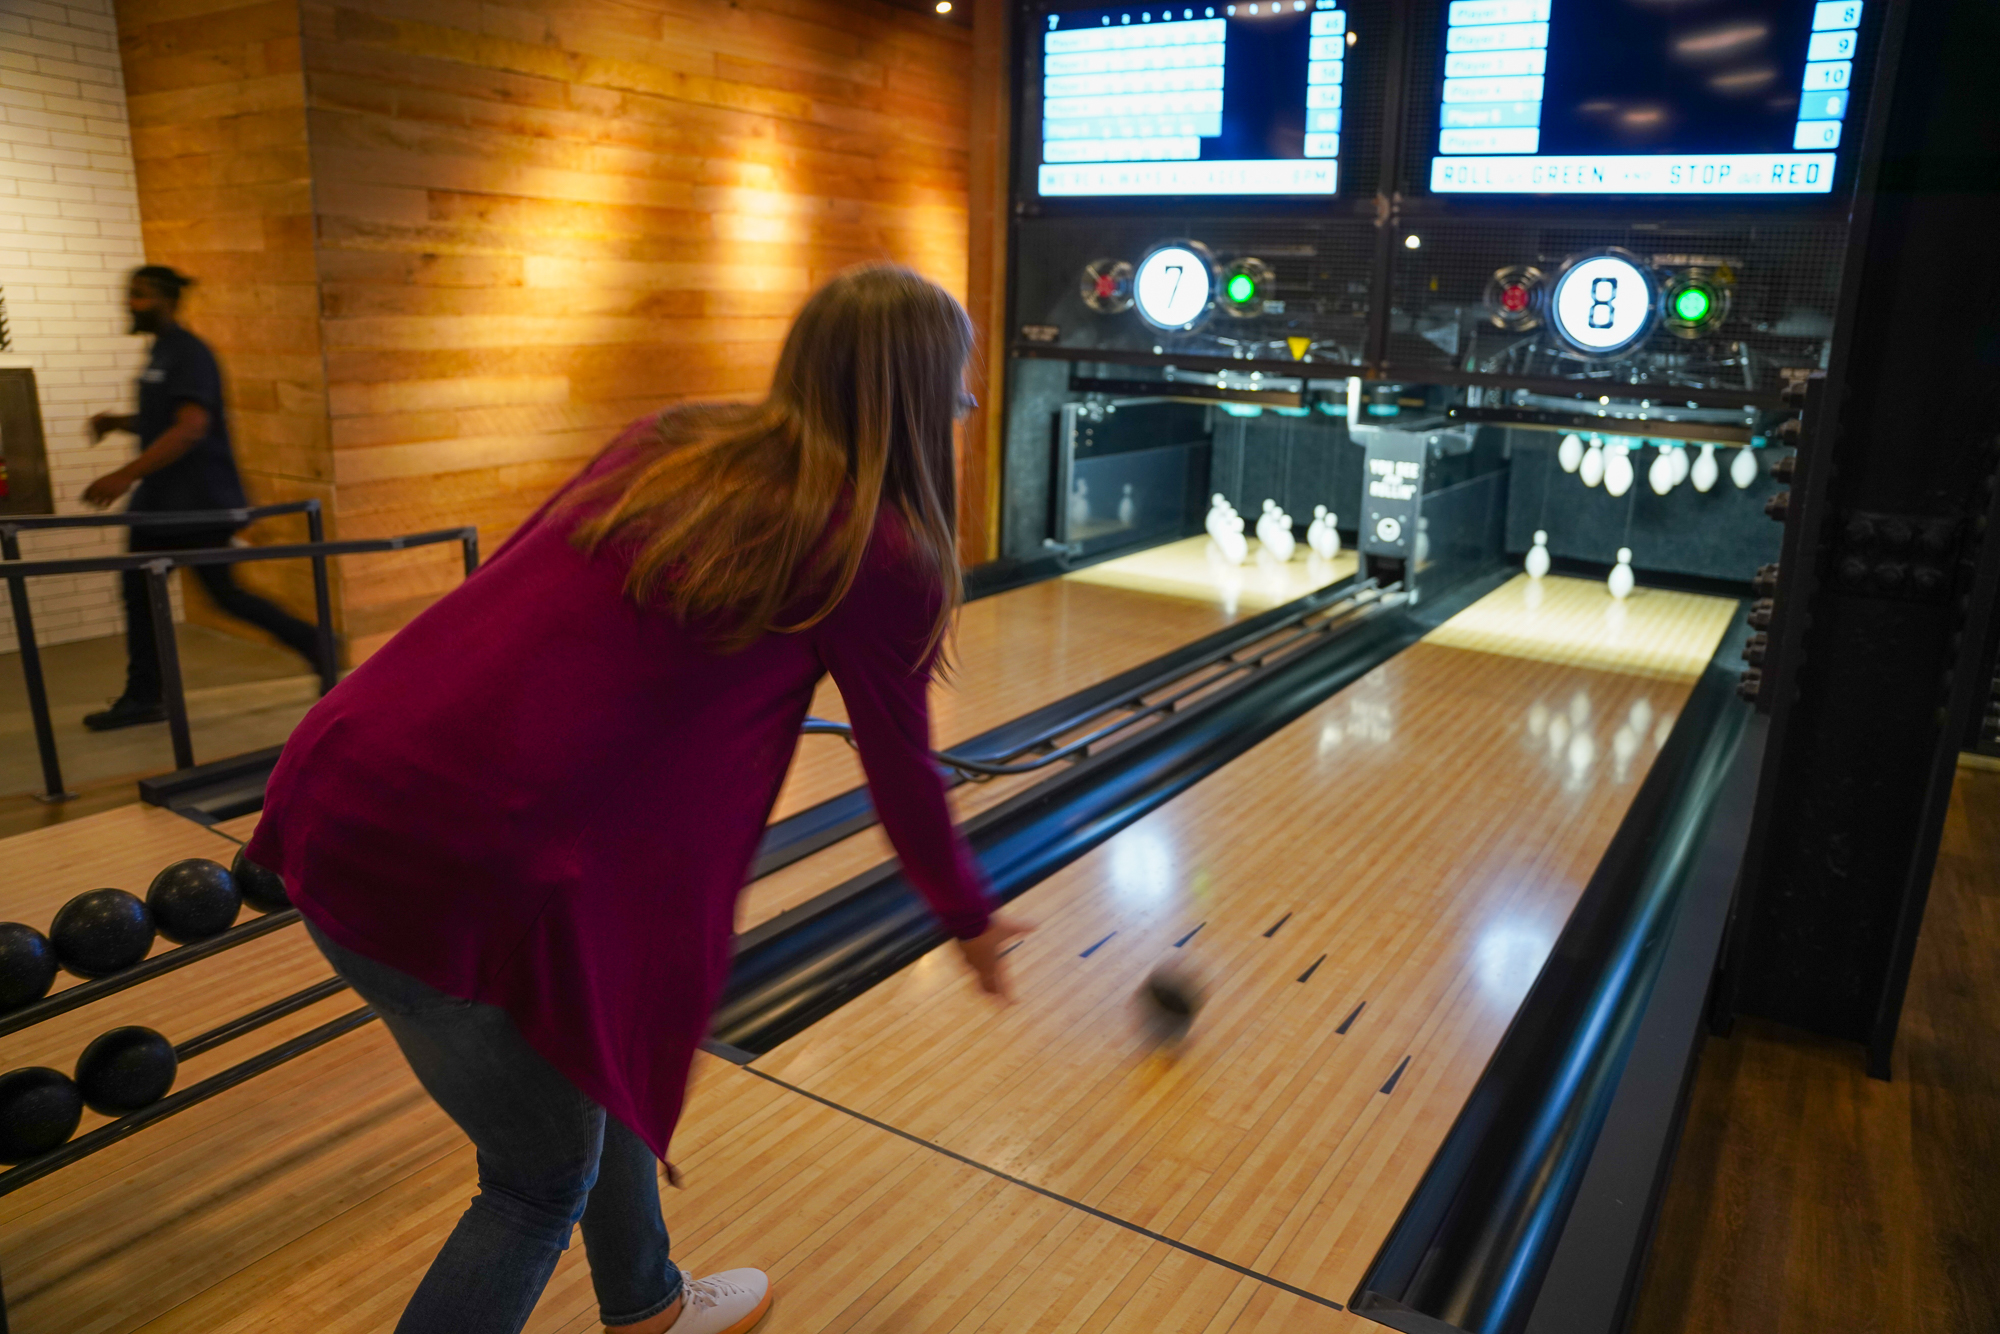 Duckpin Bowling at Pins Mechanical Company in Pittsburgh